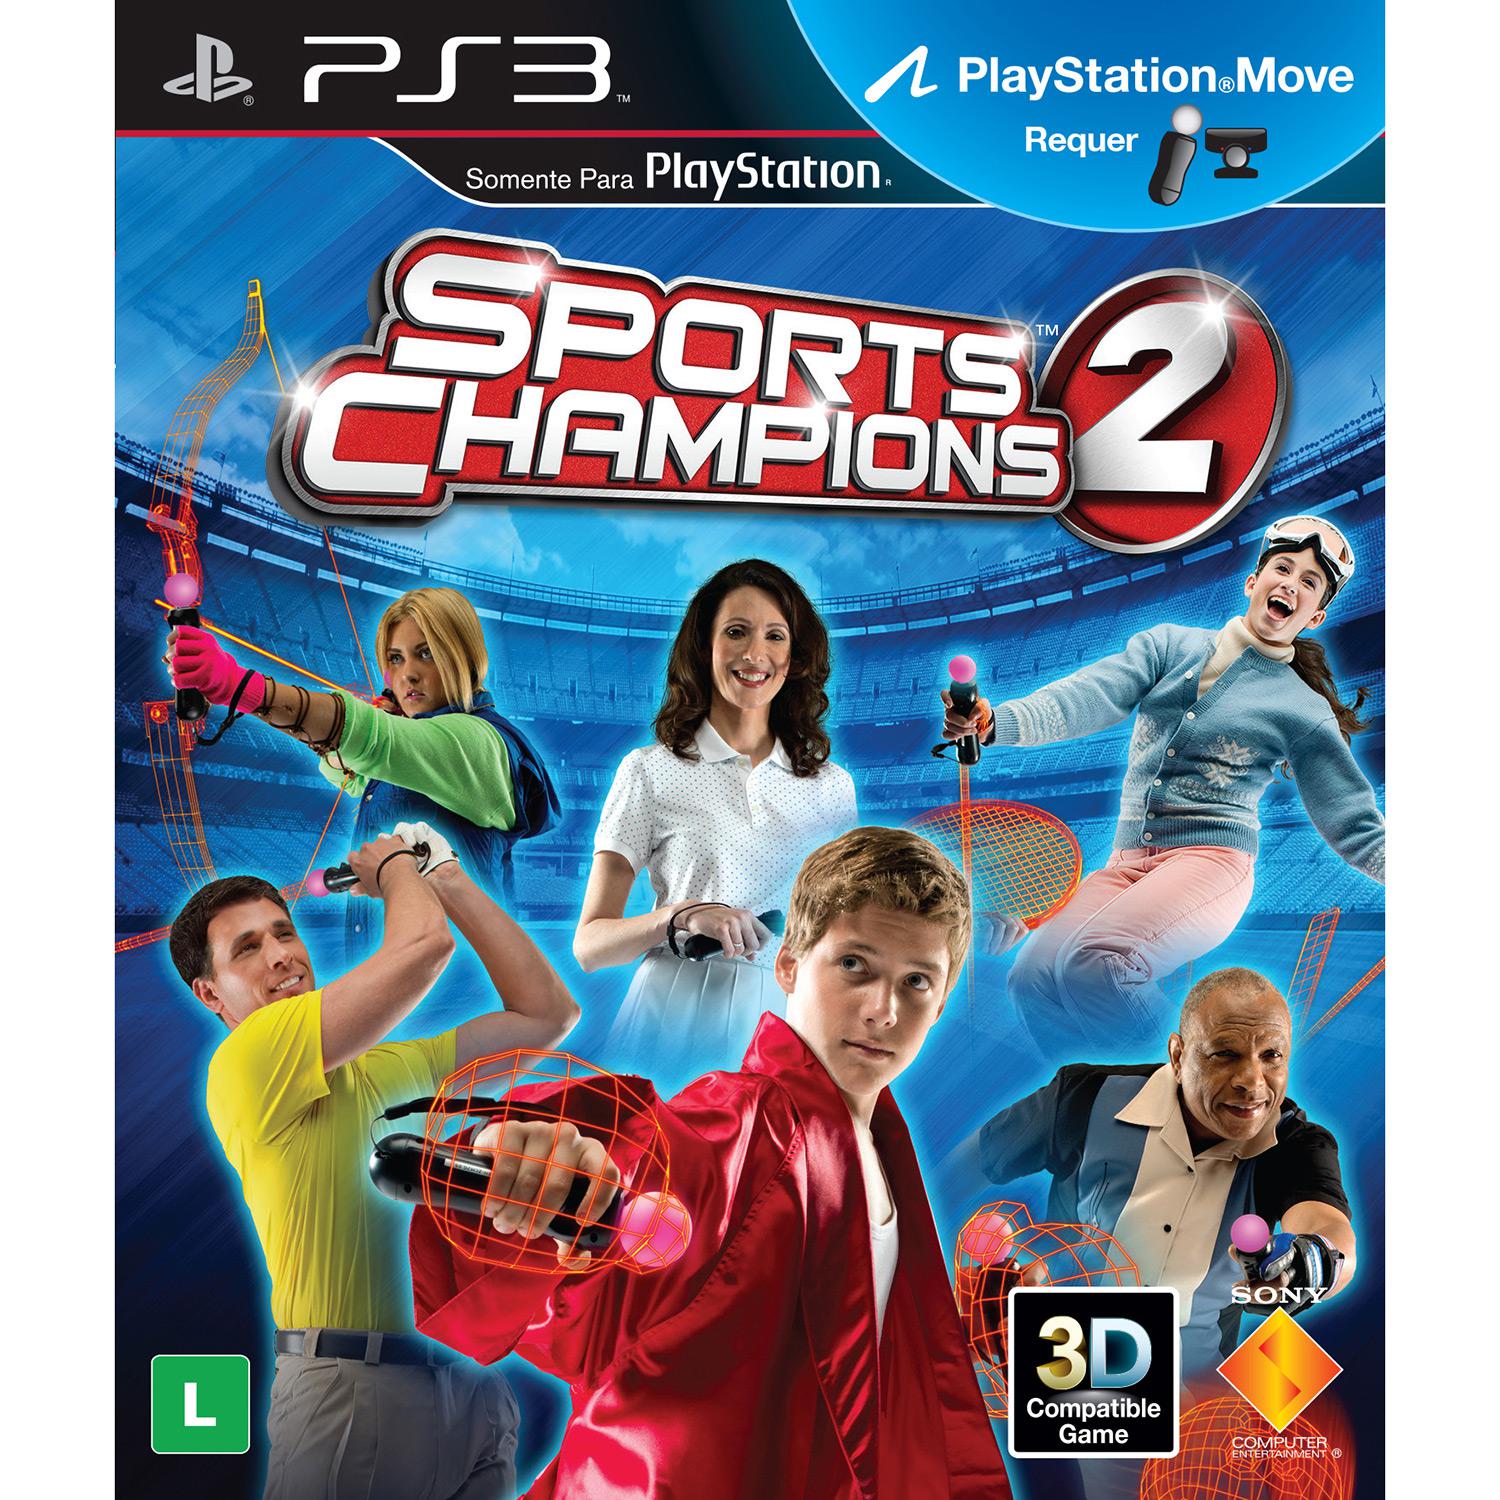 Game Sports Champions 2 - PS3 é bom? Vale a pena?